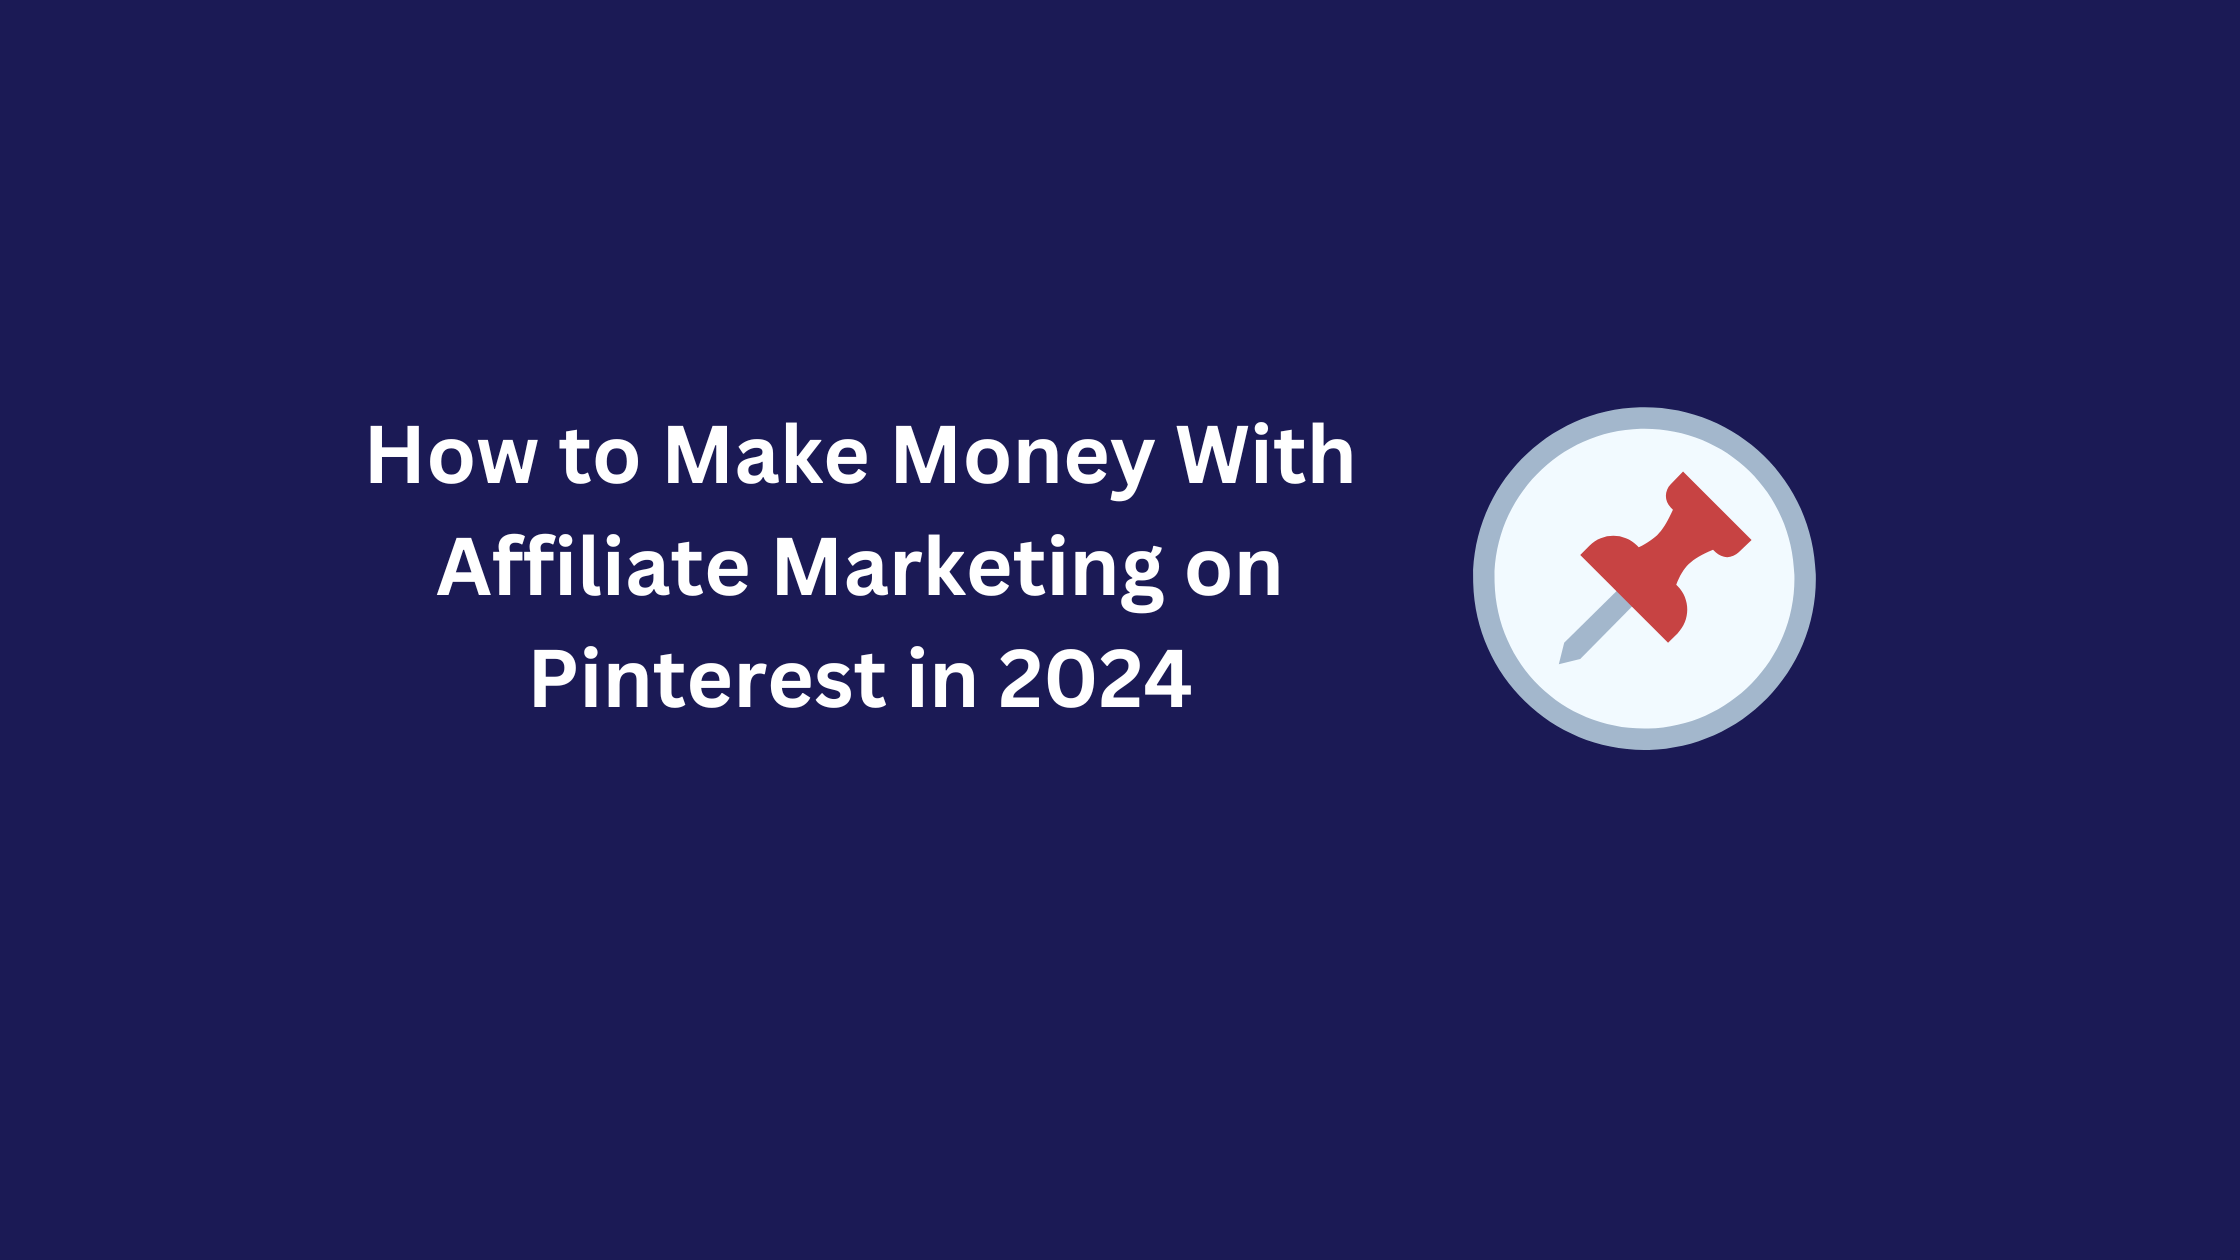 How to Make Money With Affiliate Marketing on Pinterest in 2024